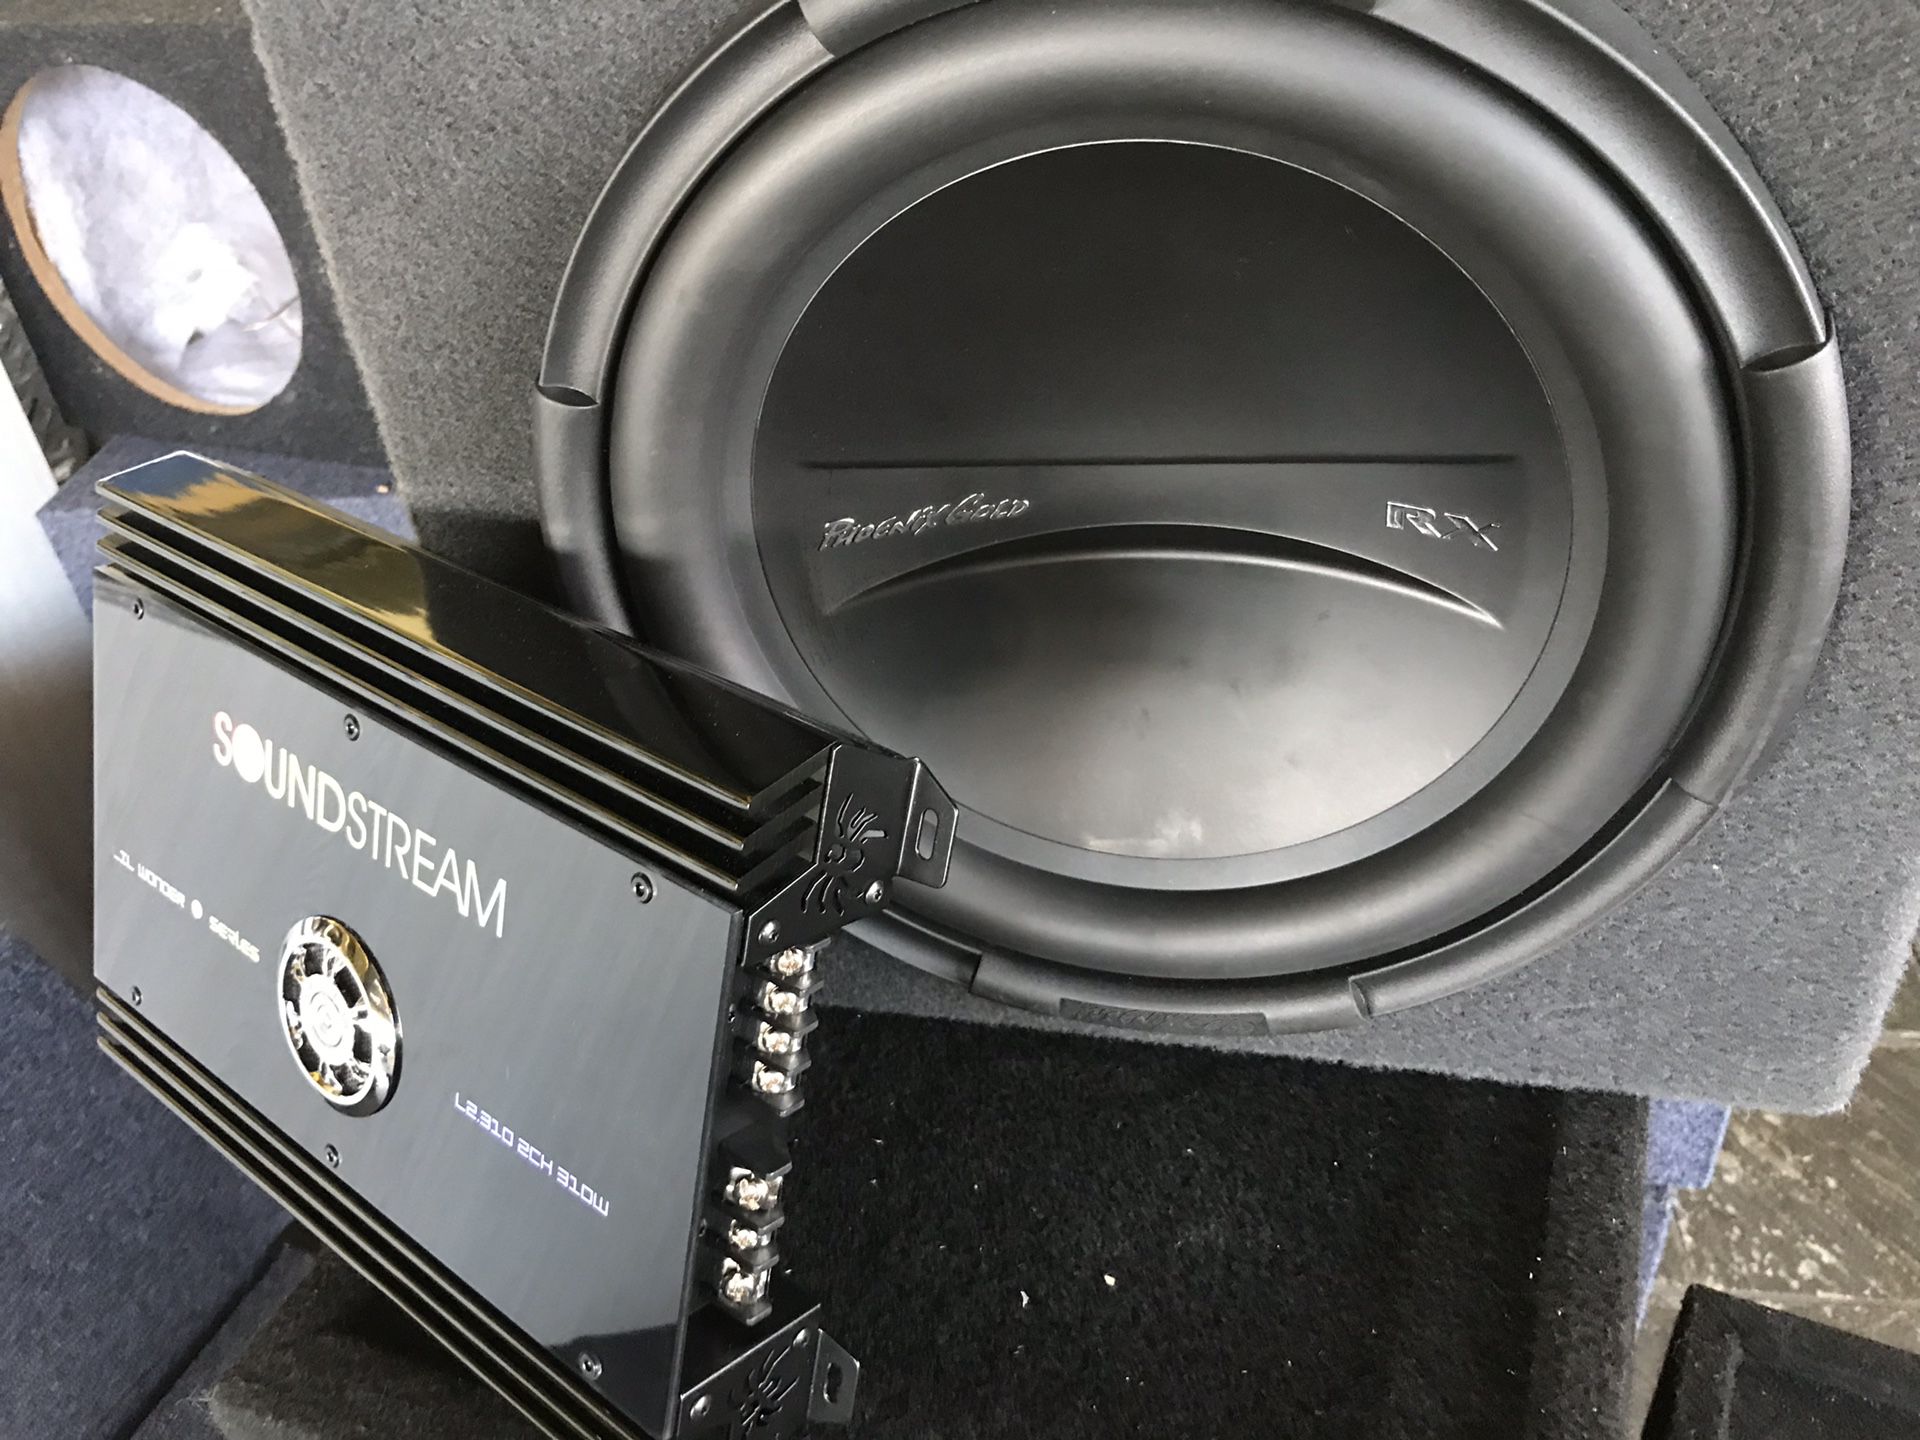 Car Audio bundle deal single 12” subwoofer with box and great amplifier display model work great great deal